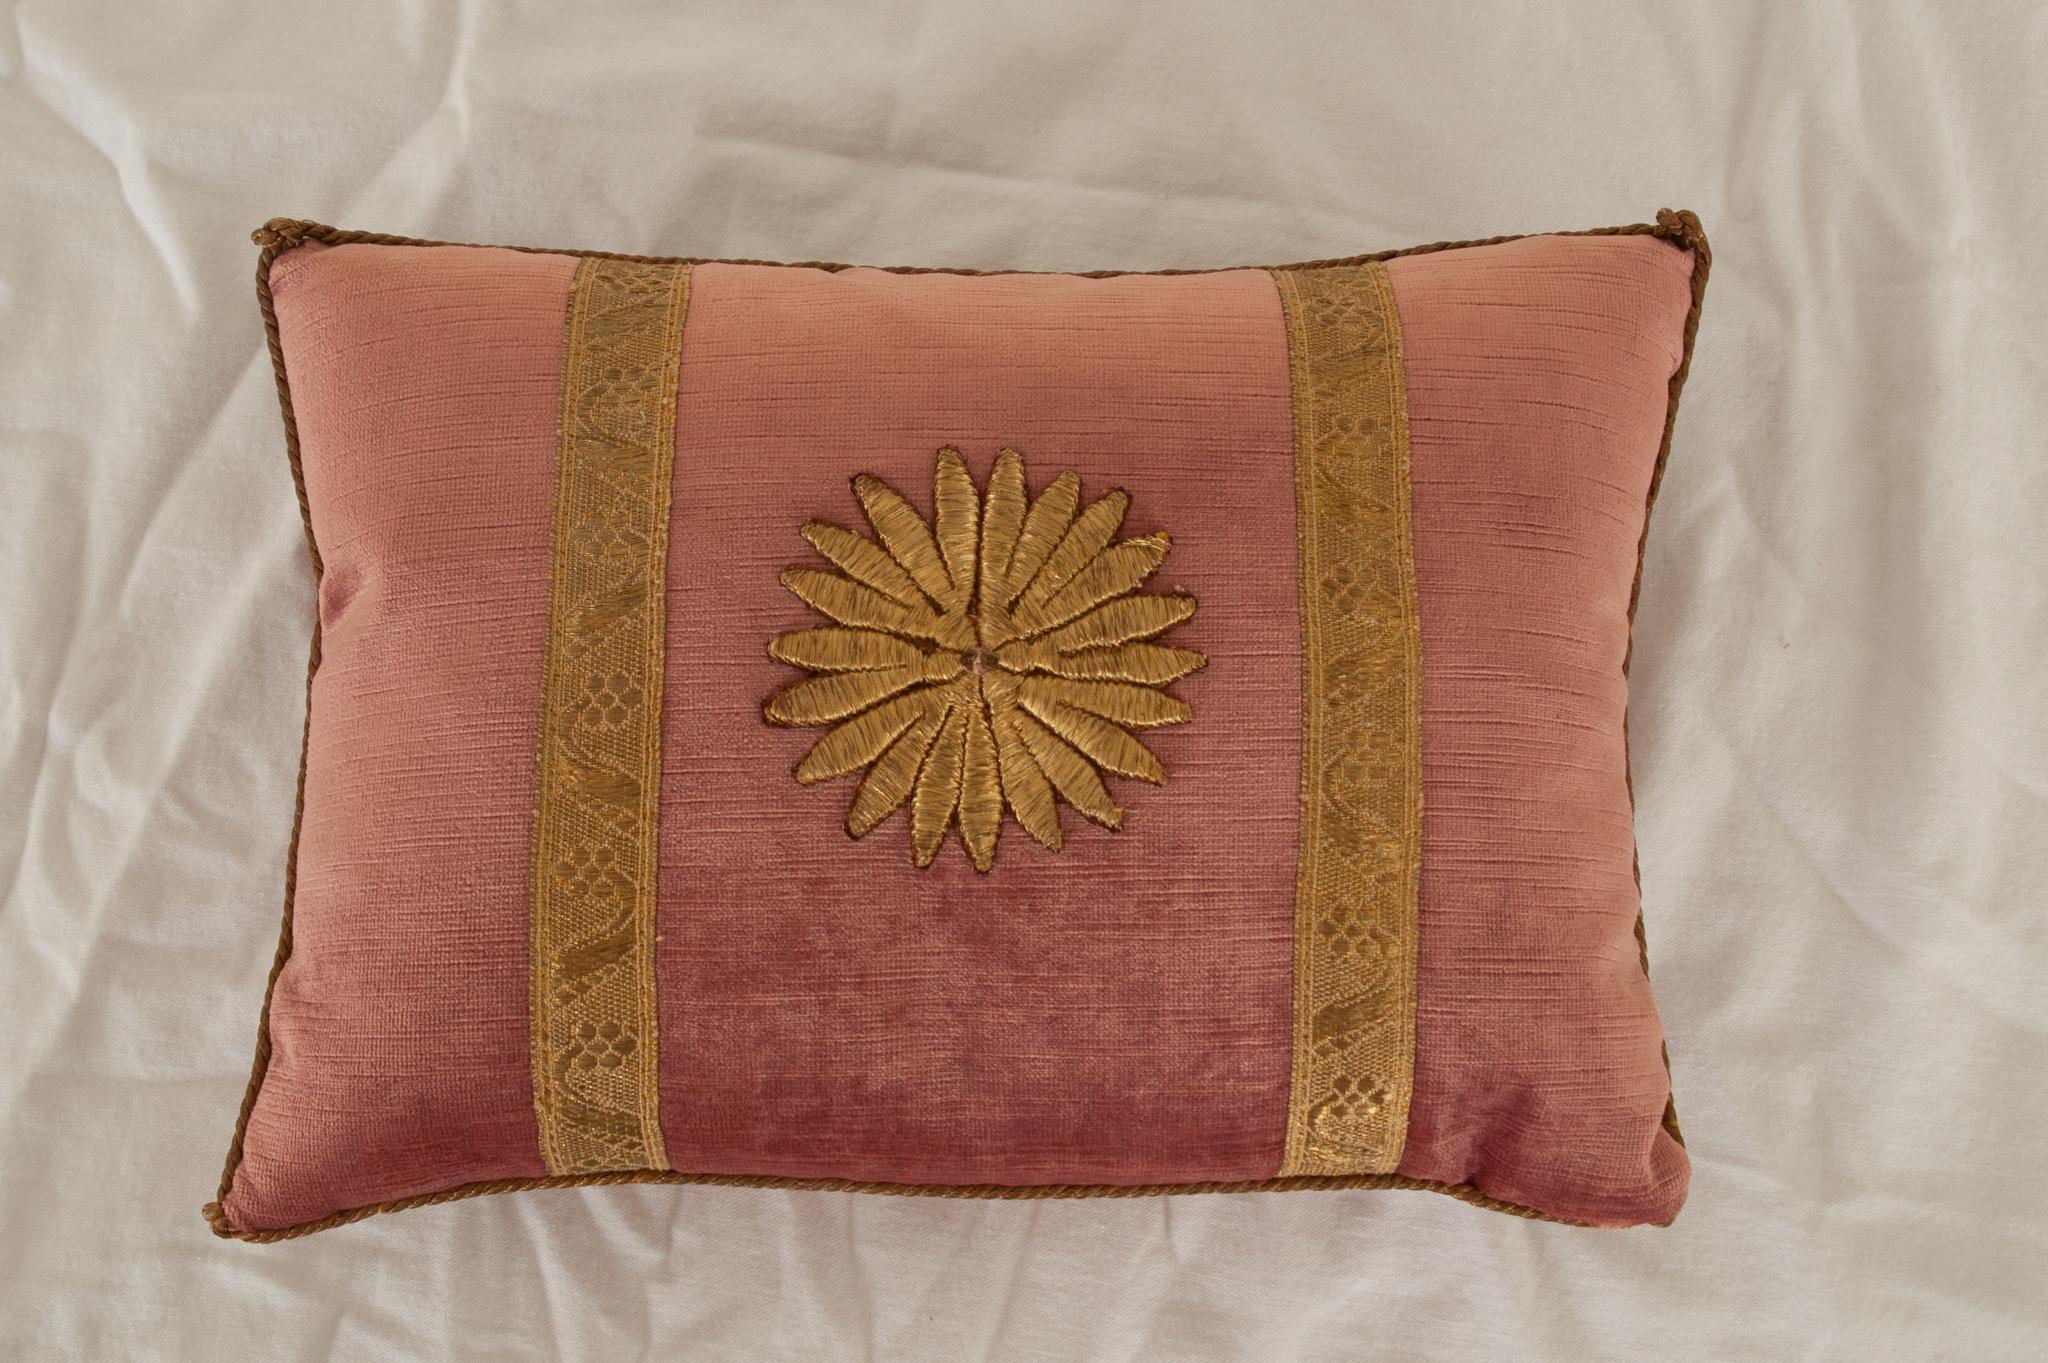 A darling accent pillow by B.Viz Designs to brighten any space. Raised metallic gold Ottoman Empire sunburst embroidery framed with antique gold metallic galon on dusty rose velvet. Hand trimmed with vintage gold cording, knotted in the corners.